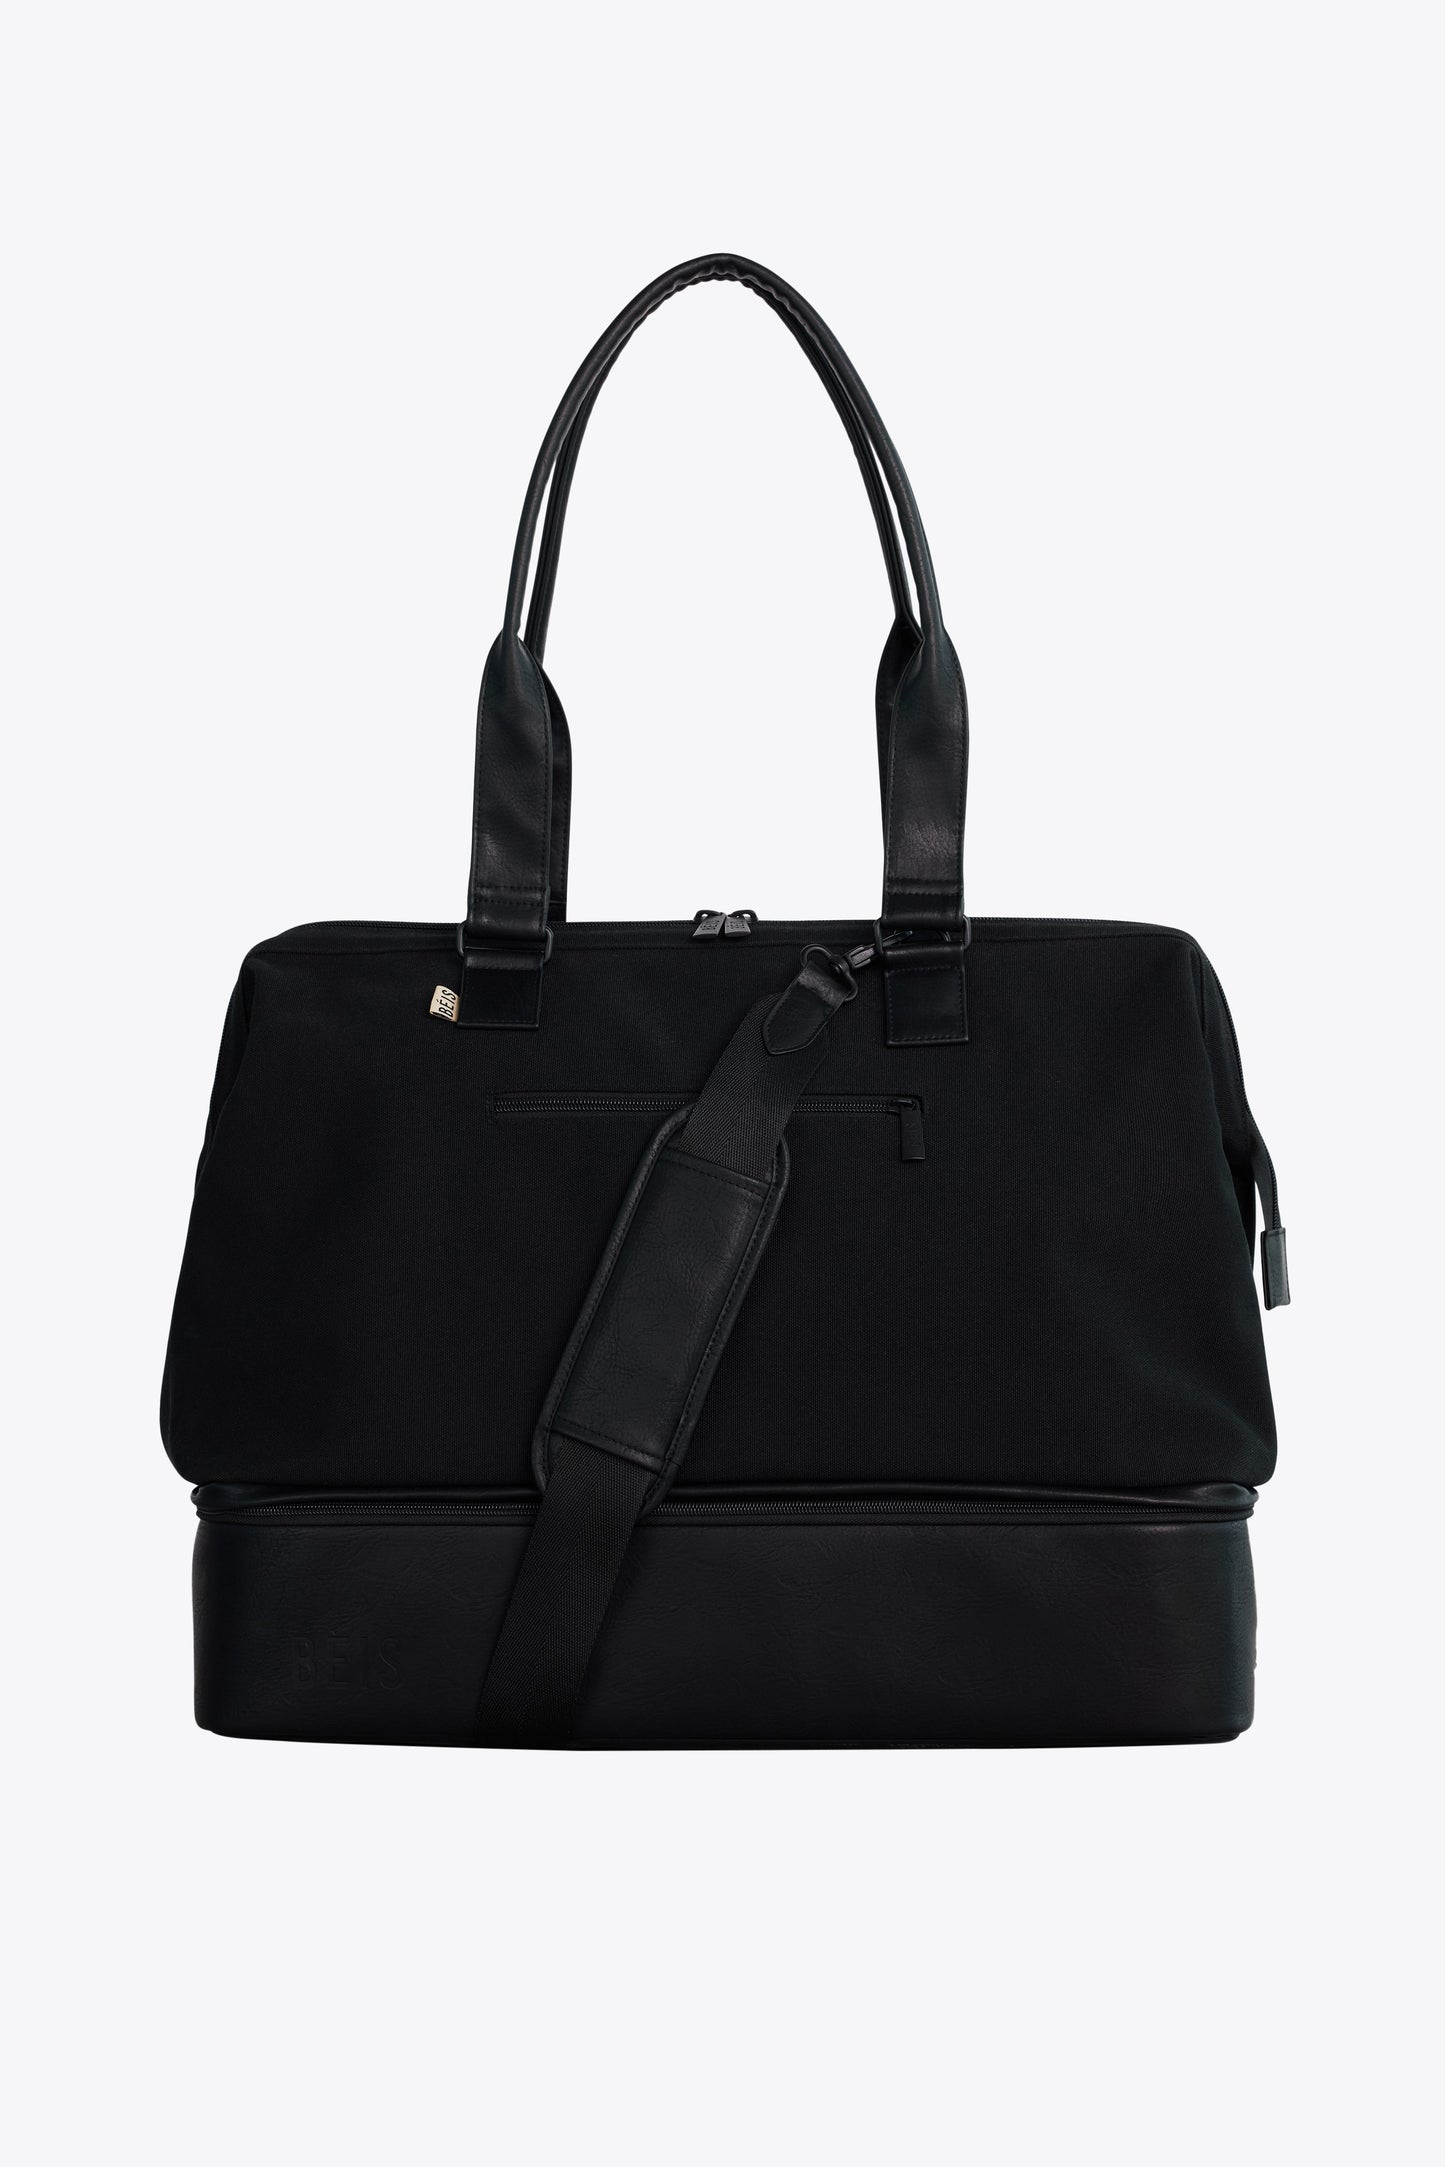 New Black Leather Bags Here For A/W 15